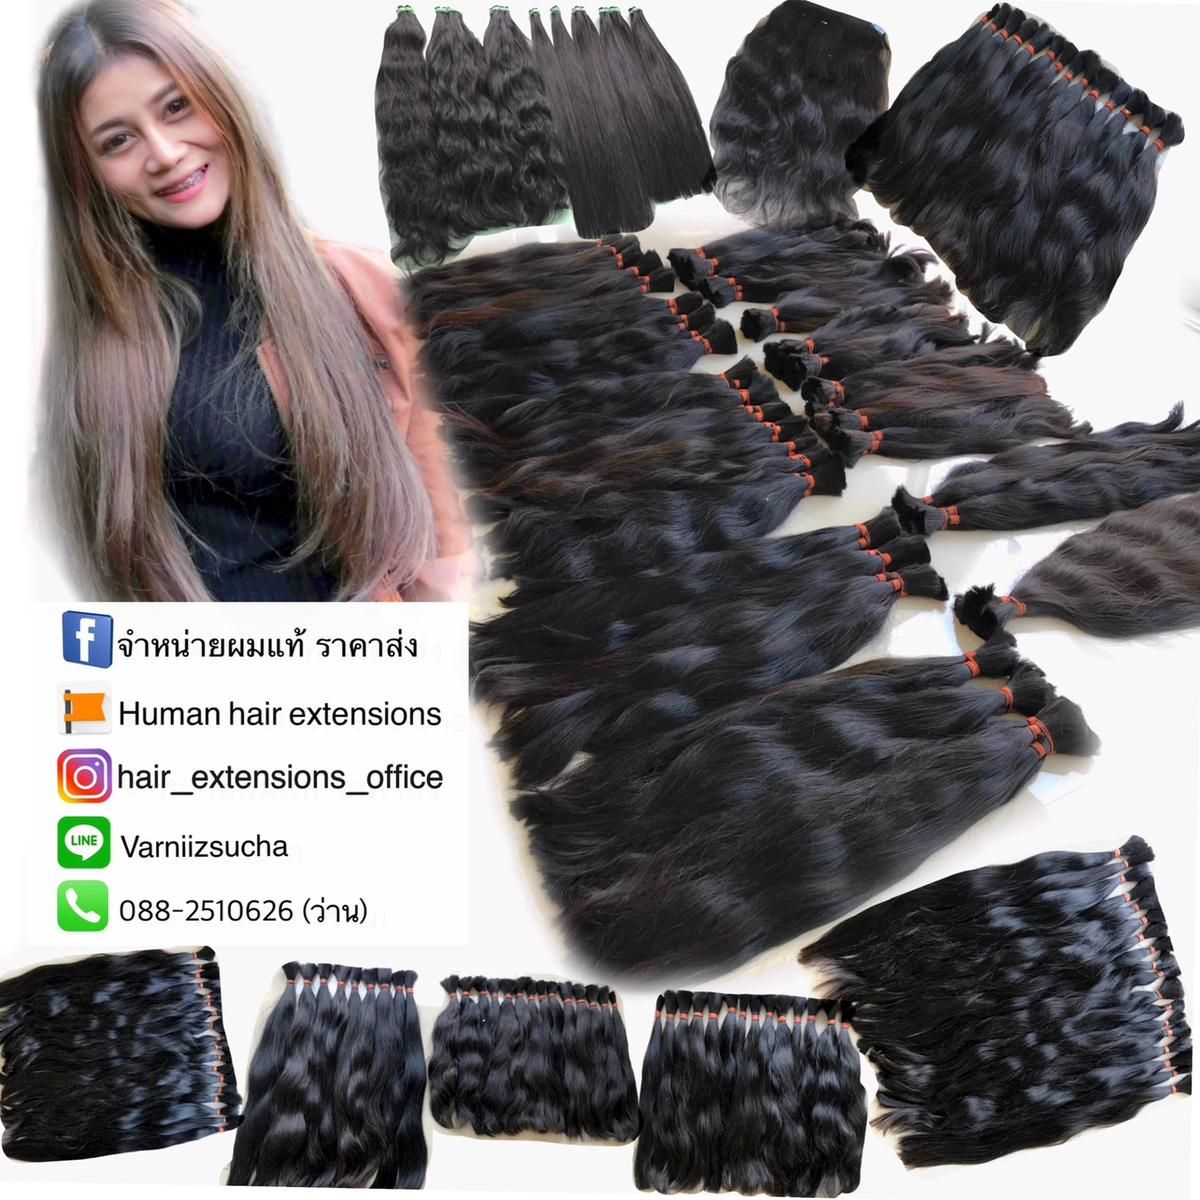 Hair Extensions